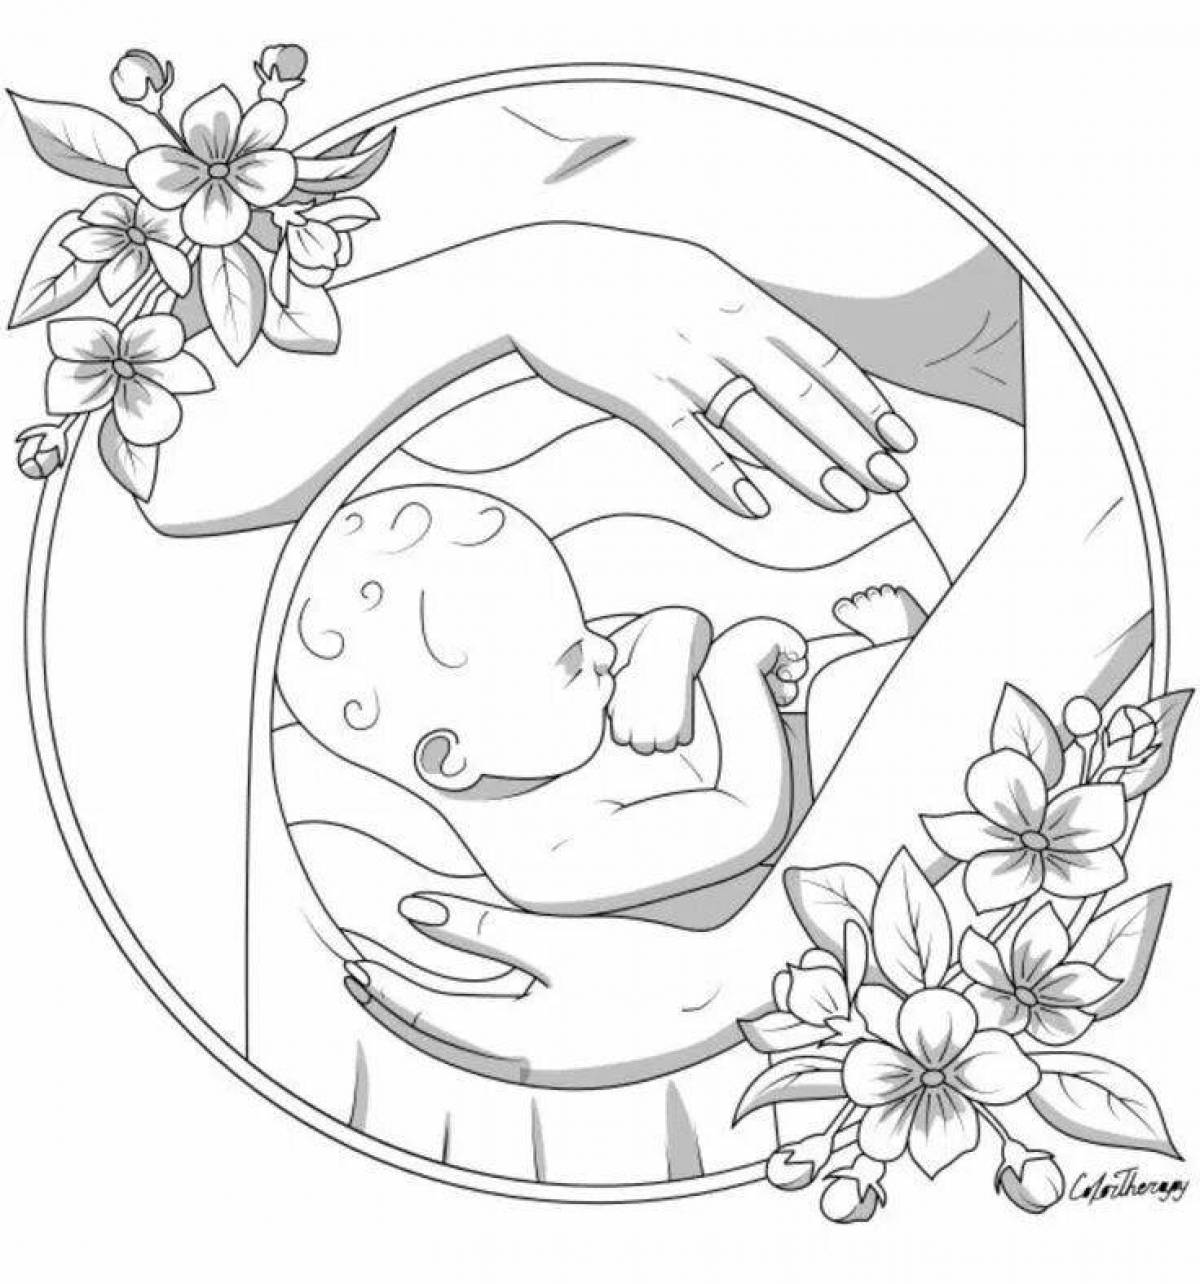 Colorful pregnancy coloring page